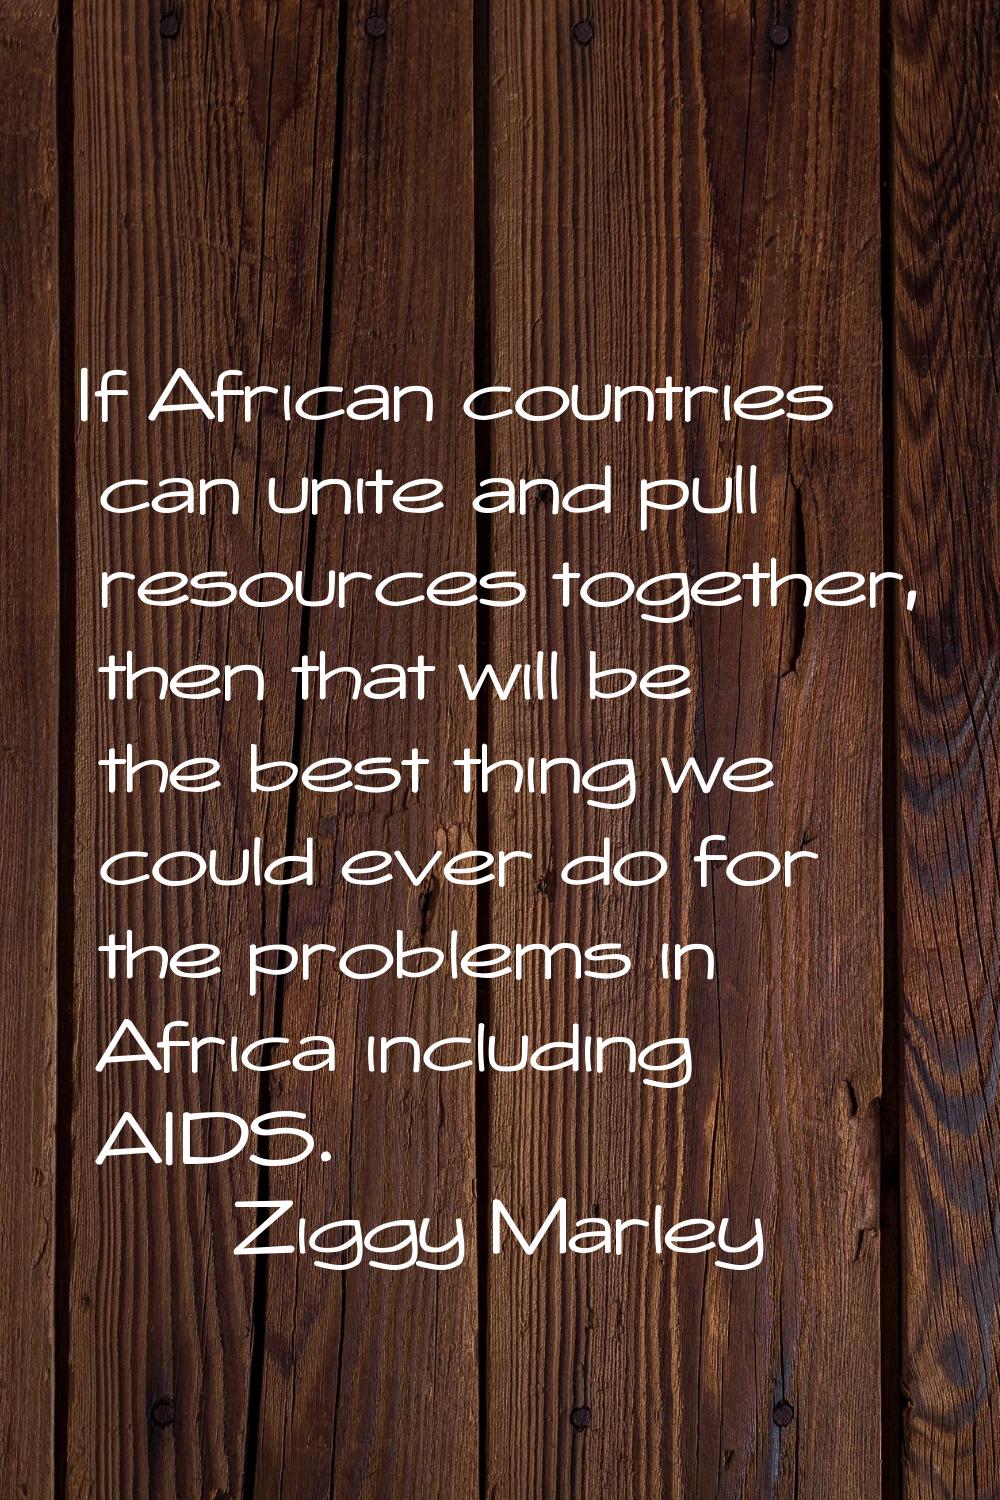 If African countries can unite and pull resources together, then that will be the best thing we cou